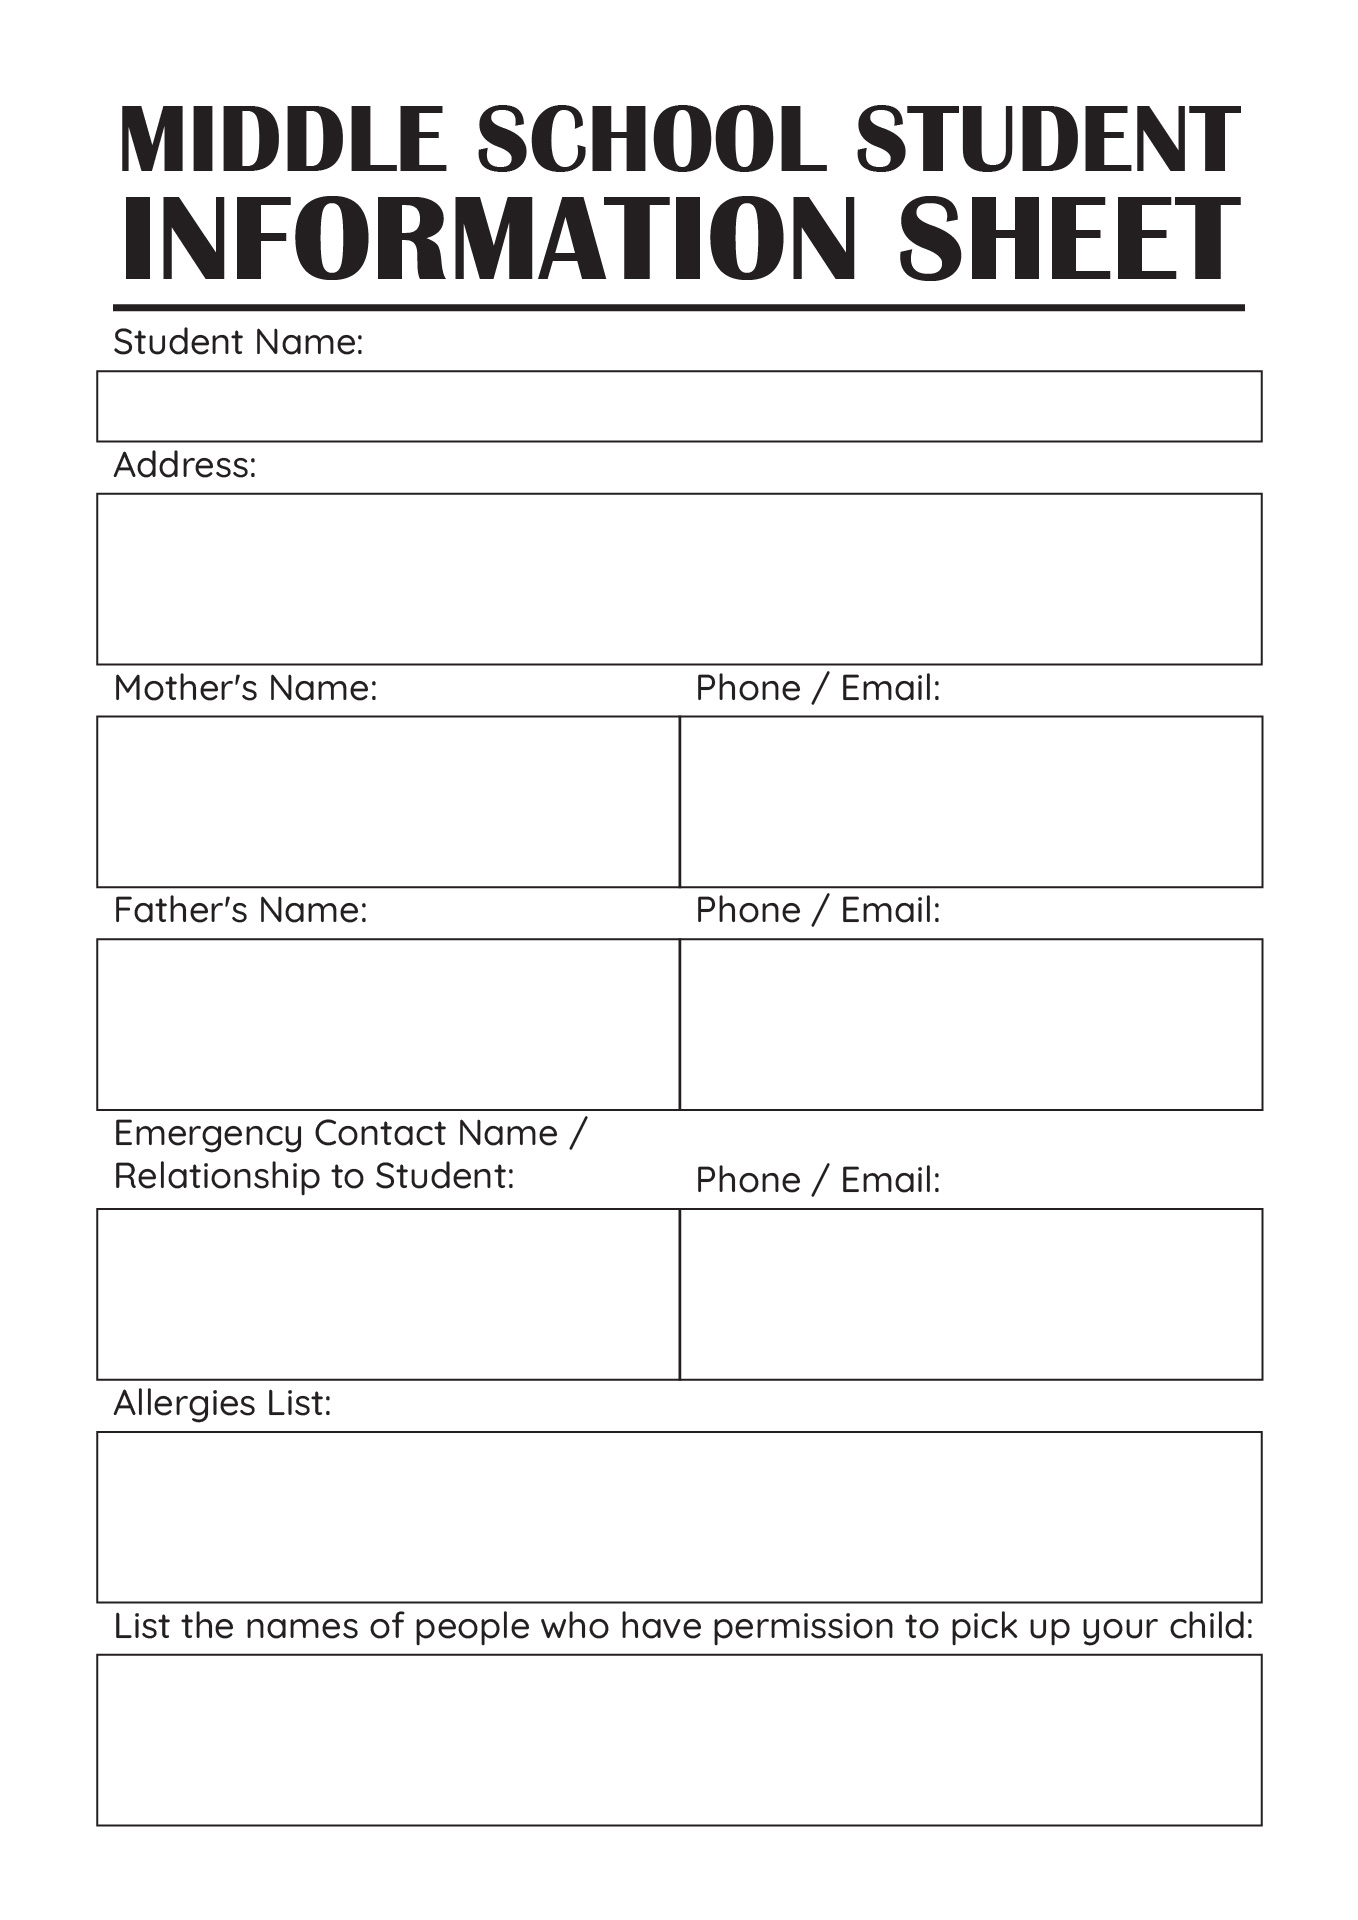 Middle School Student Information Sheet